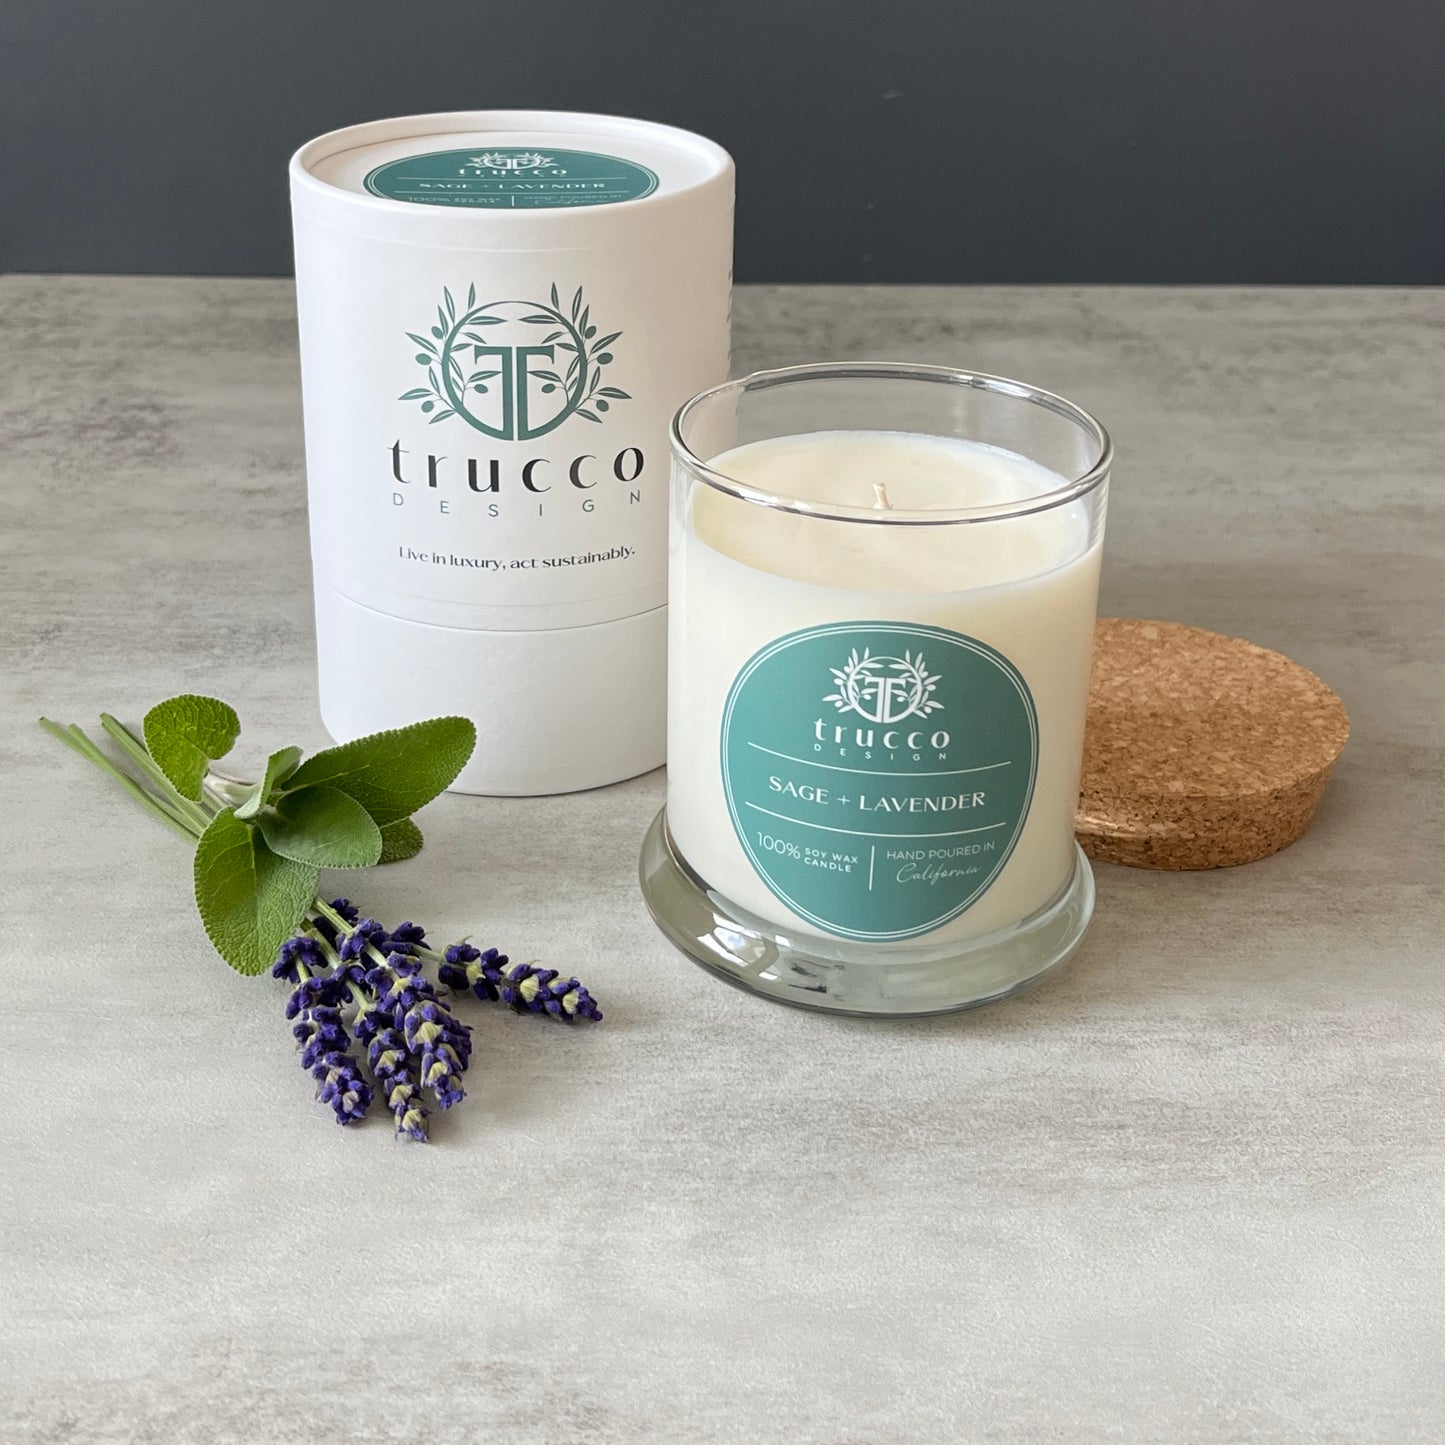 Fig + Flower Soy Candle